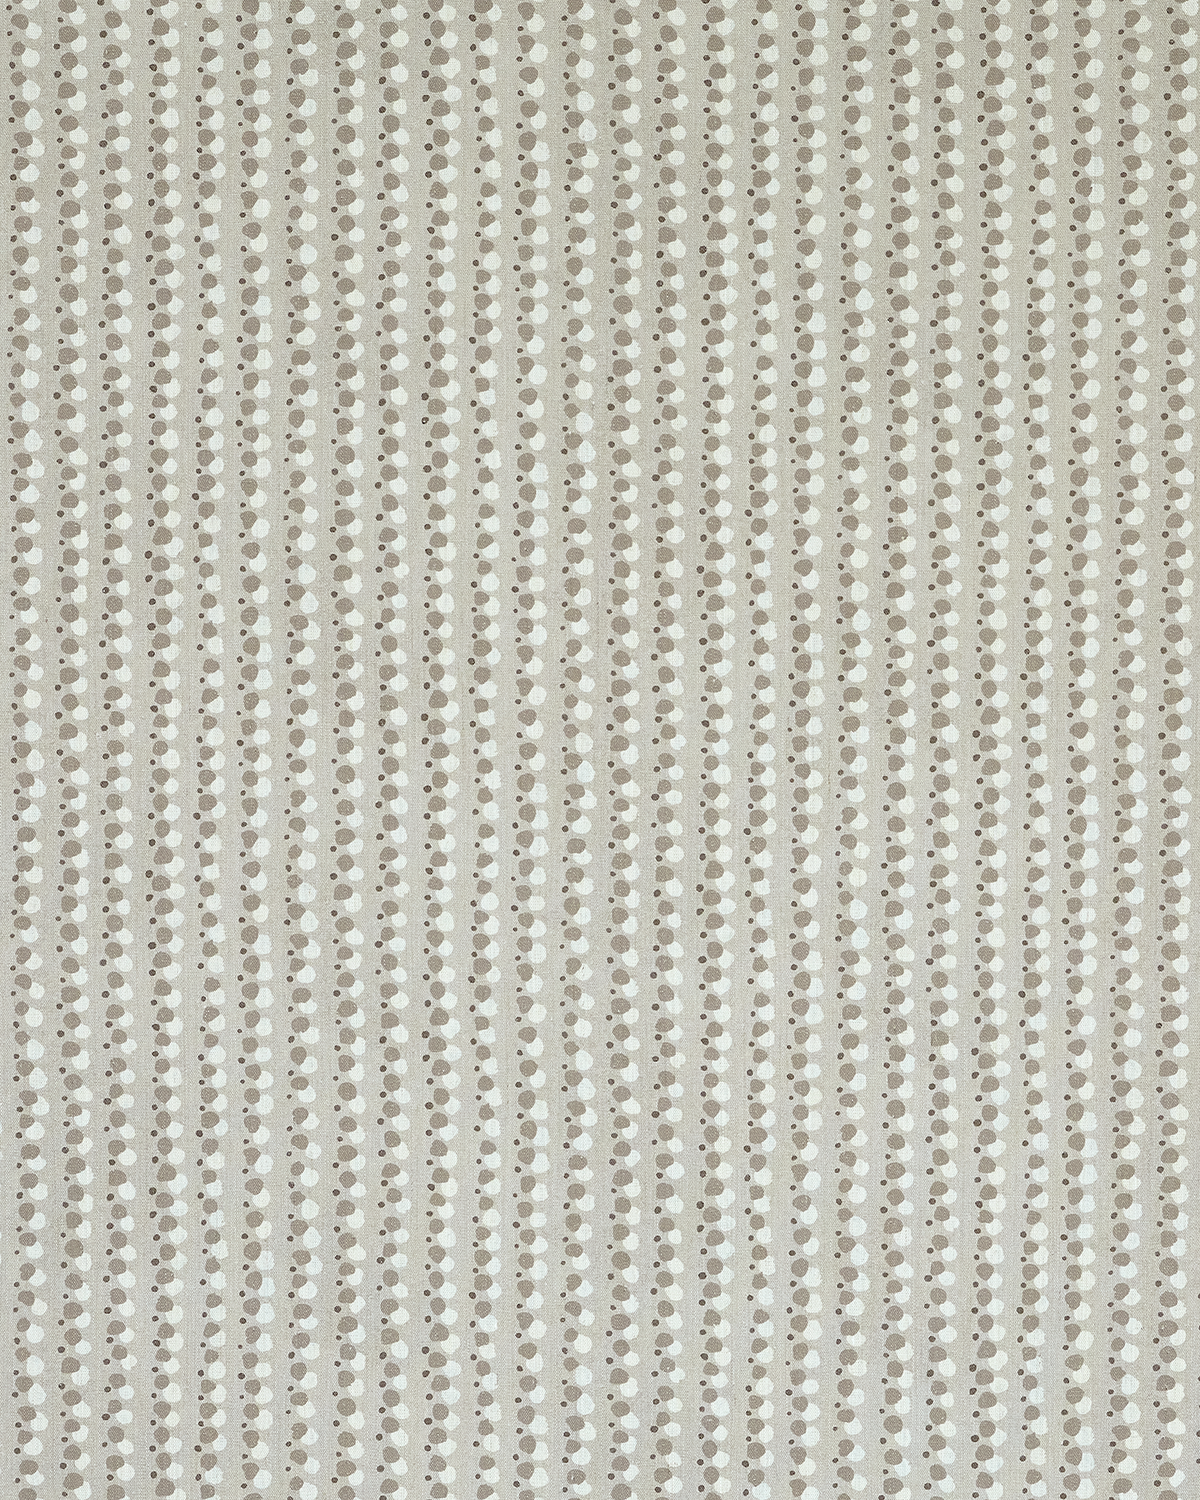 Dotted Lines Fabric in Shore Gray